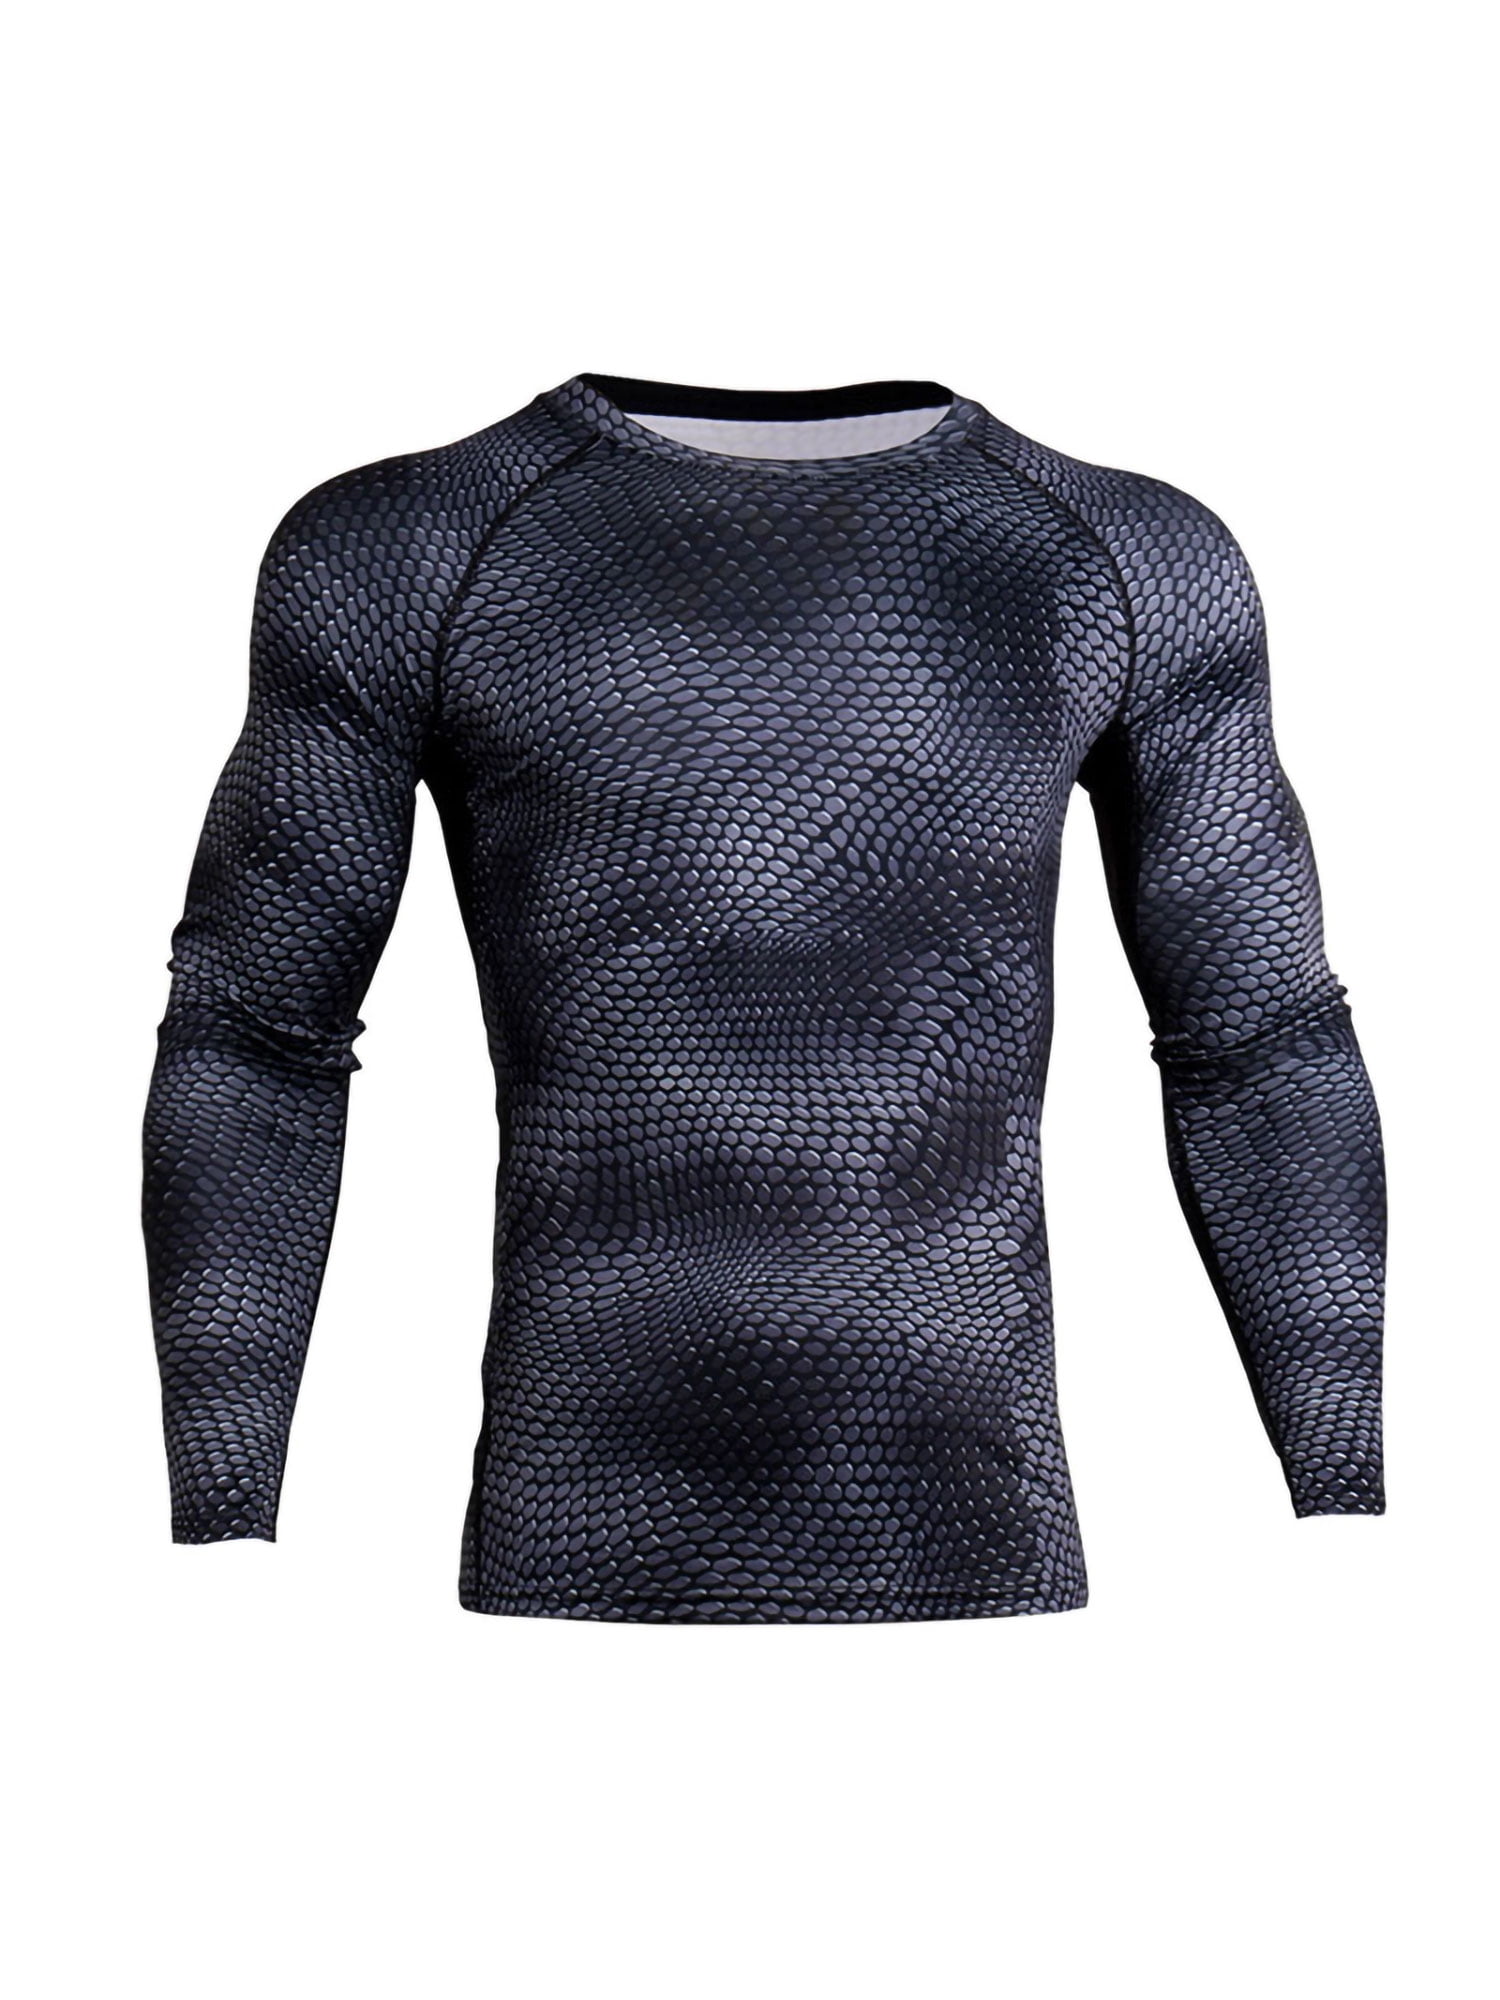 Details about   Men's Compression Fitness Base Layer Slim Solid T-Shirt Top Workout Activewear 